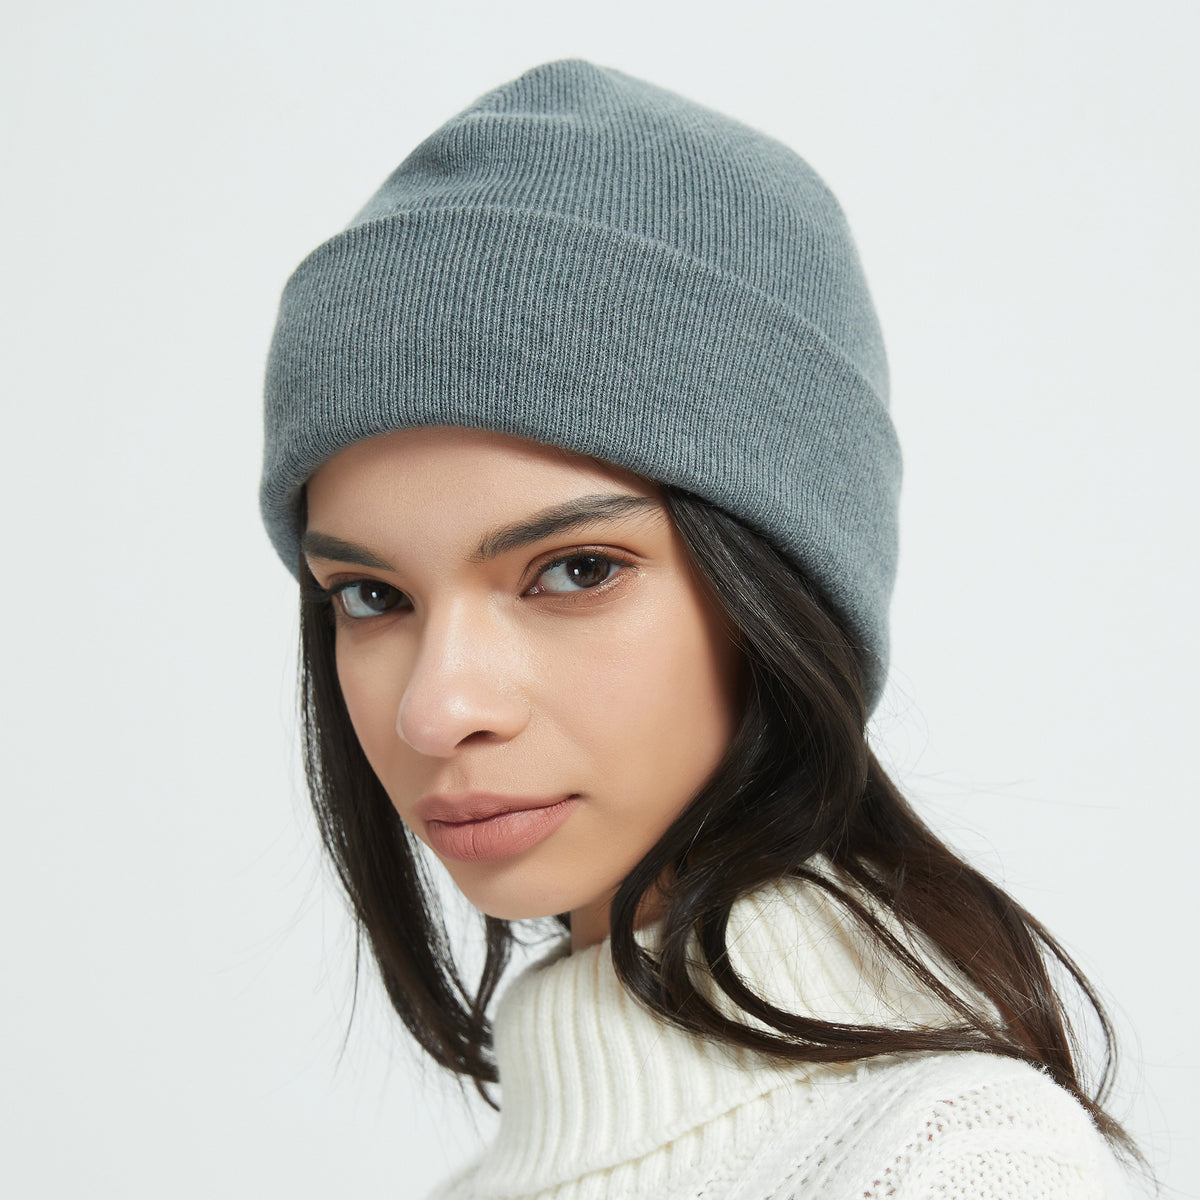 A girl wears Radiation Proof Beanie, which has a woolen lining on the outside surface